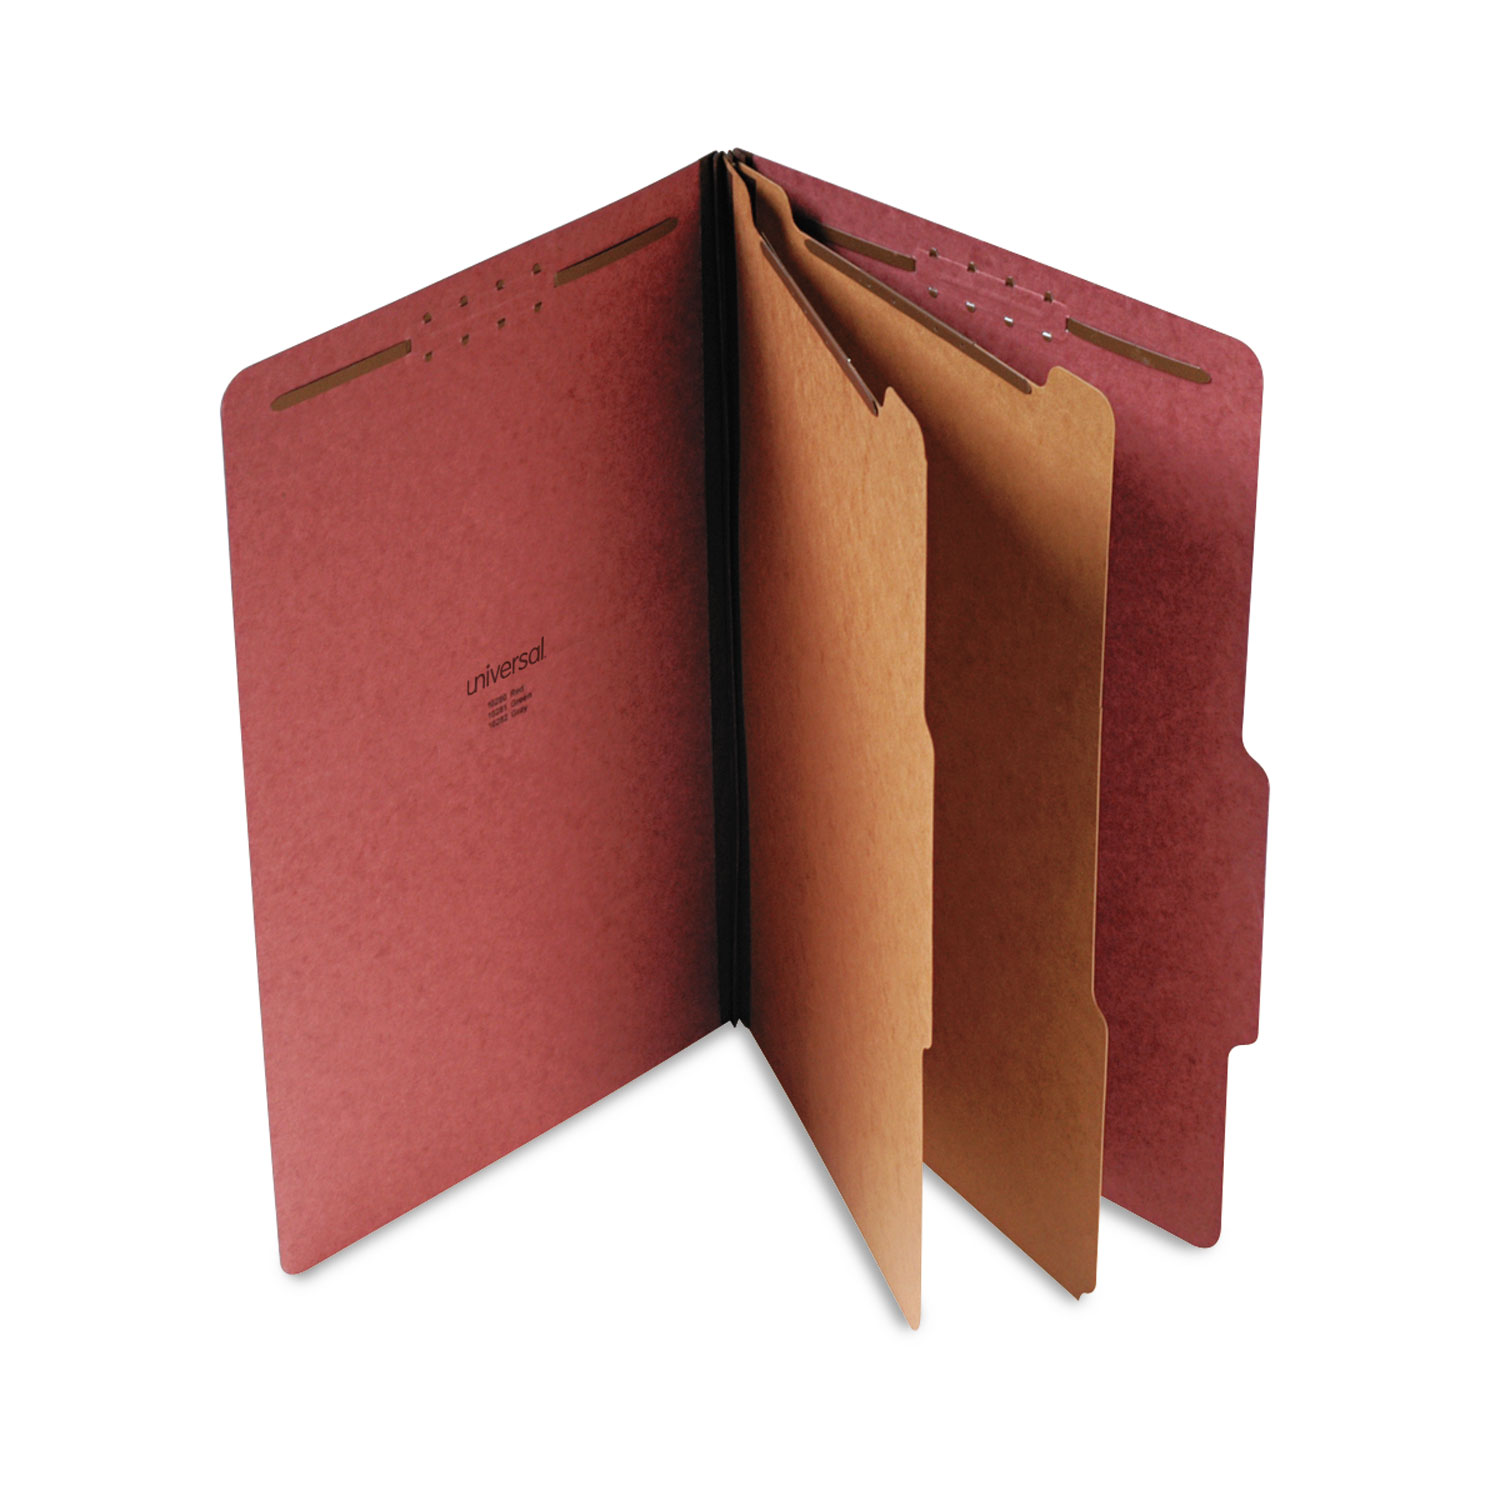  Universal UNV10280 Six--Section Pressboard Classification Folders, 2 Dividers, Legal Size, Red, 10/Box (UNV10280) 